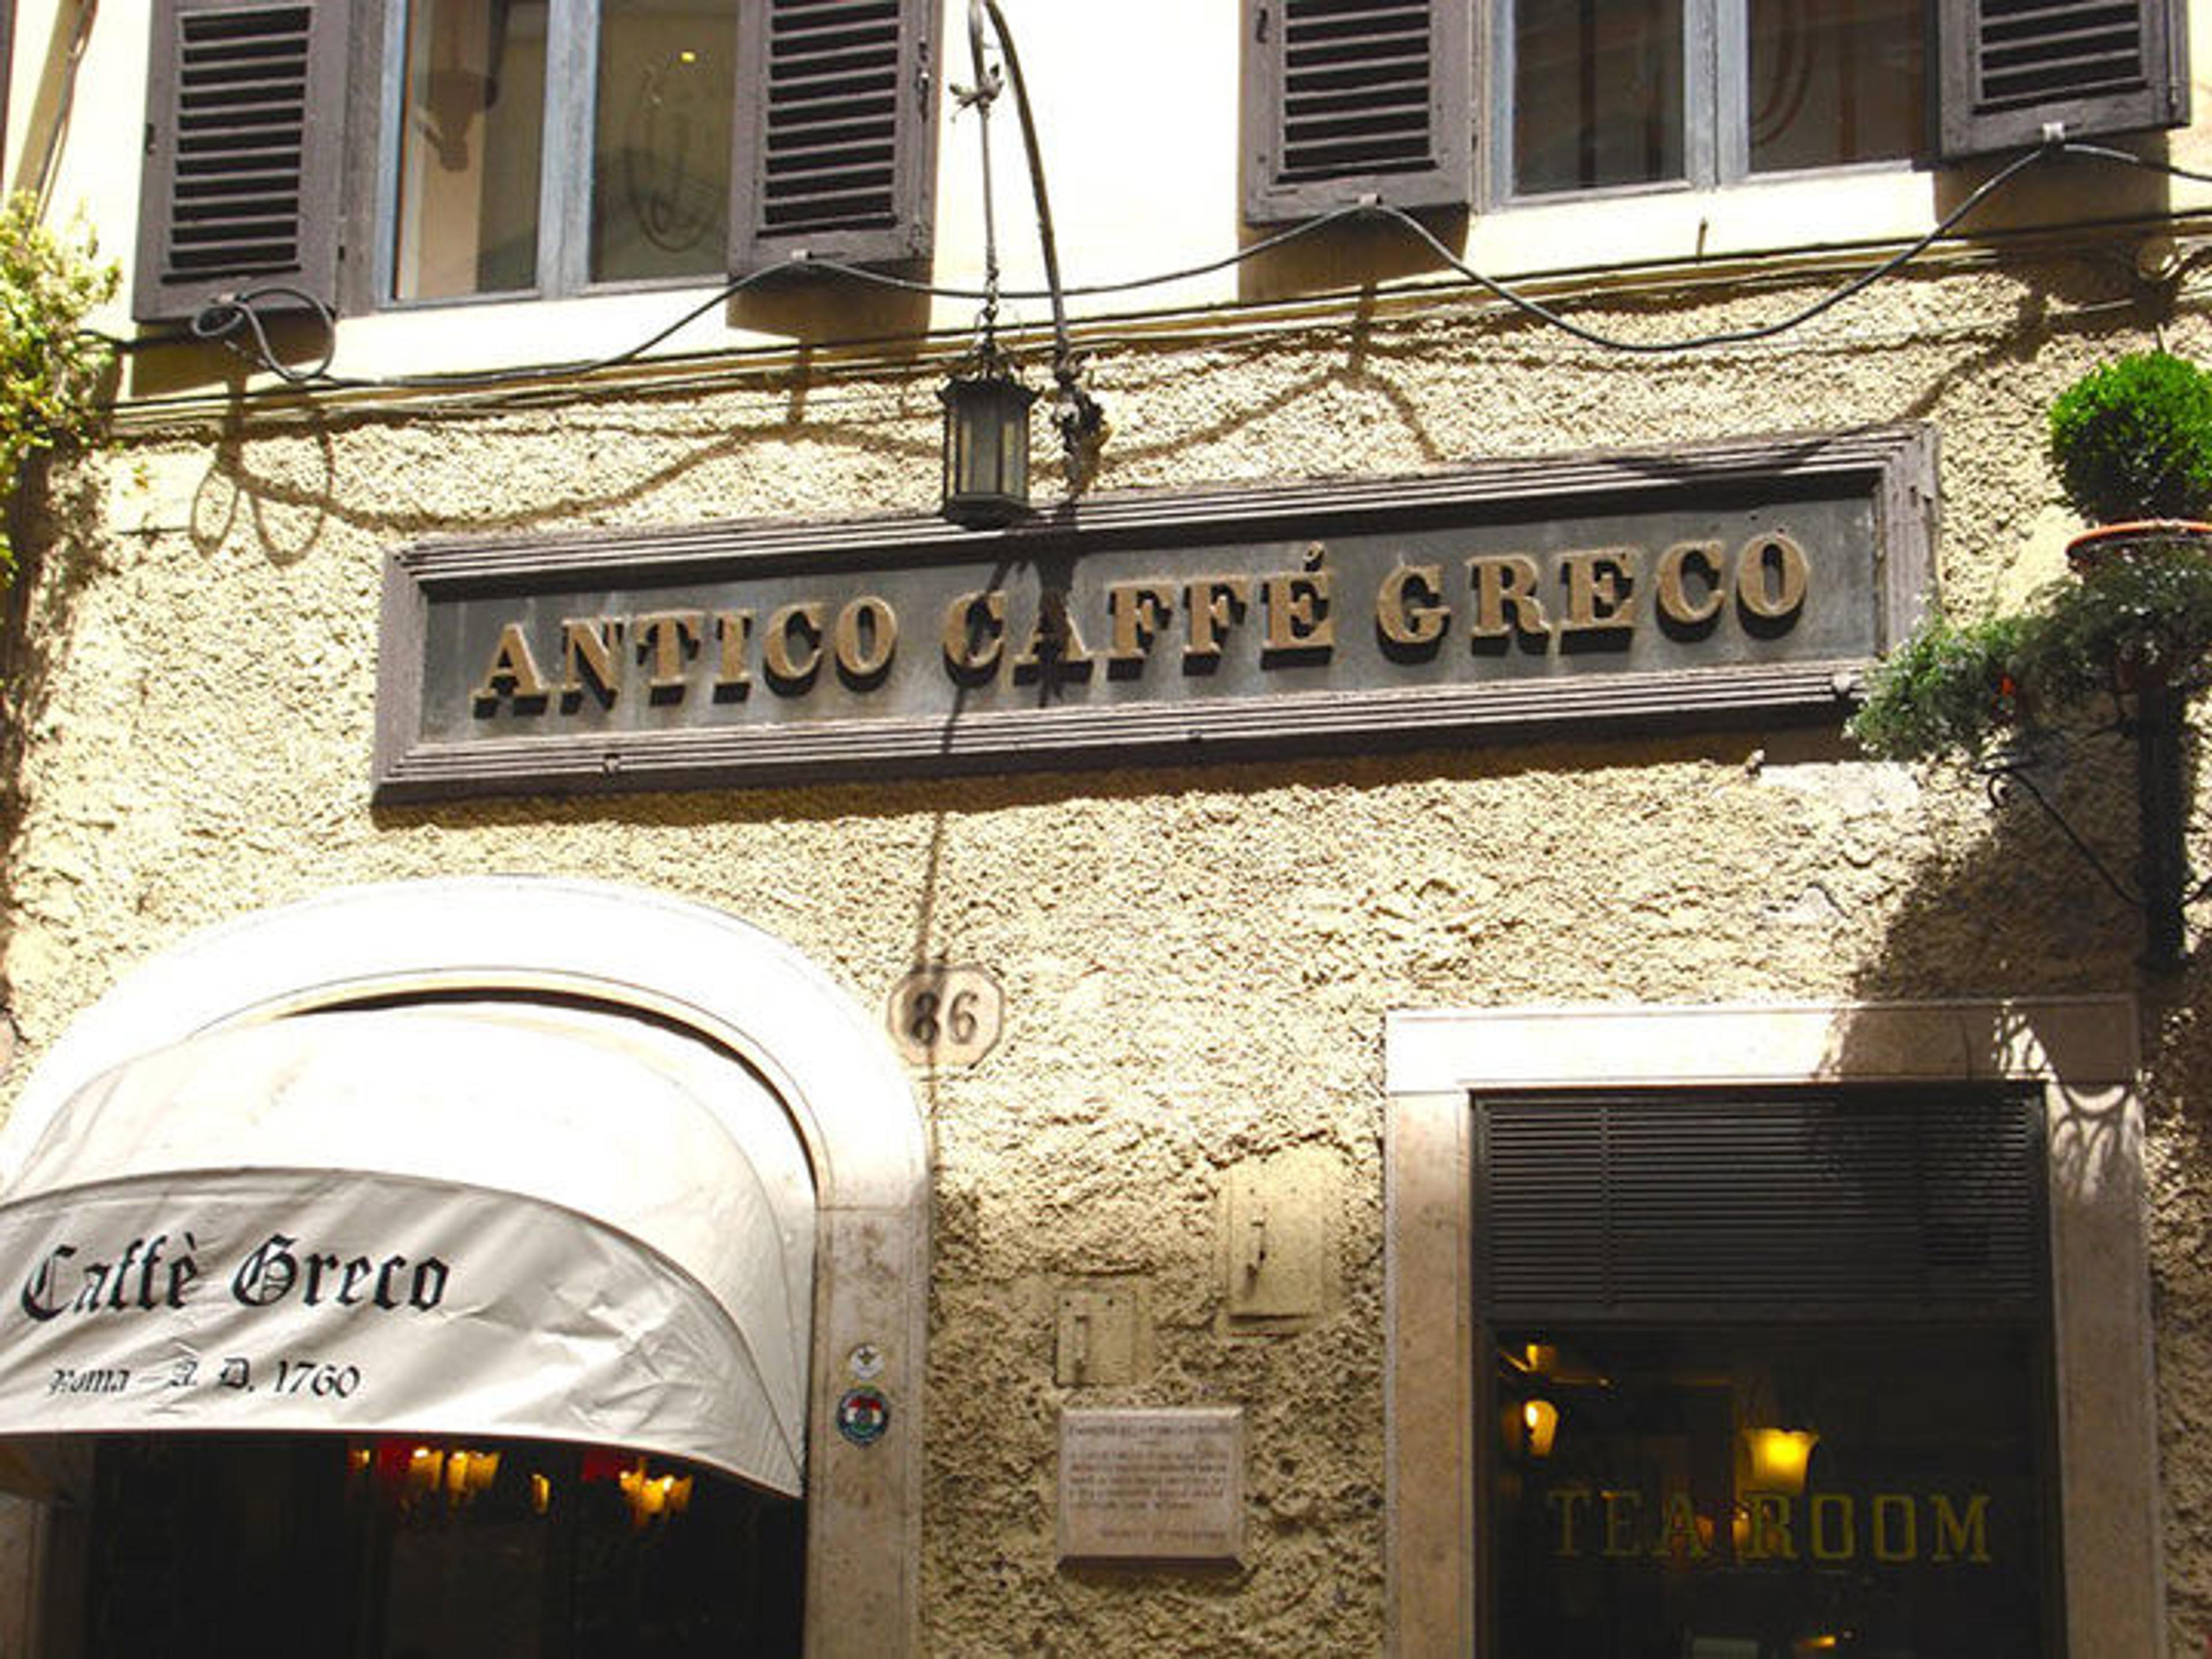 Exterior of the Caffe Greco in modern day